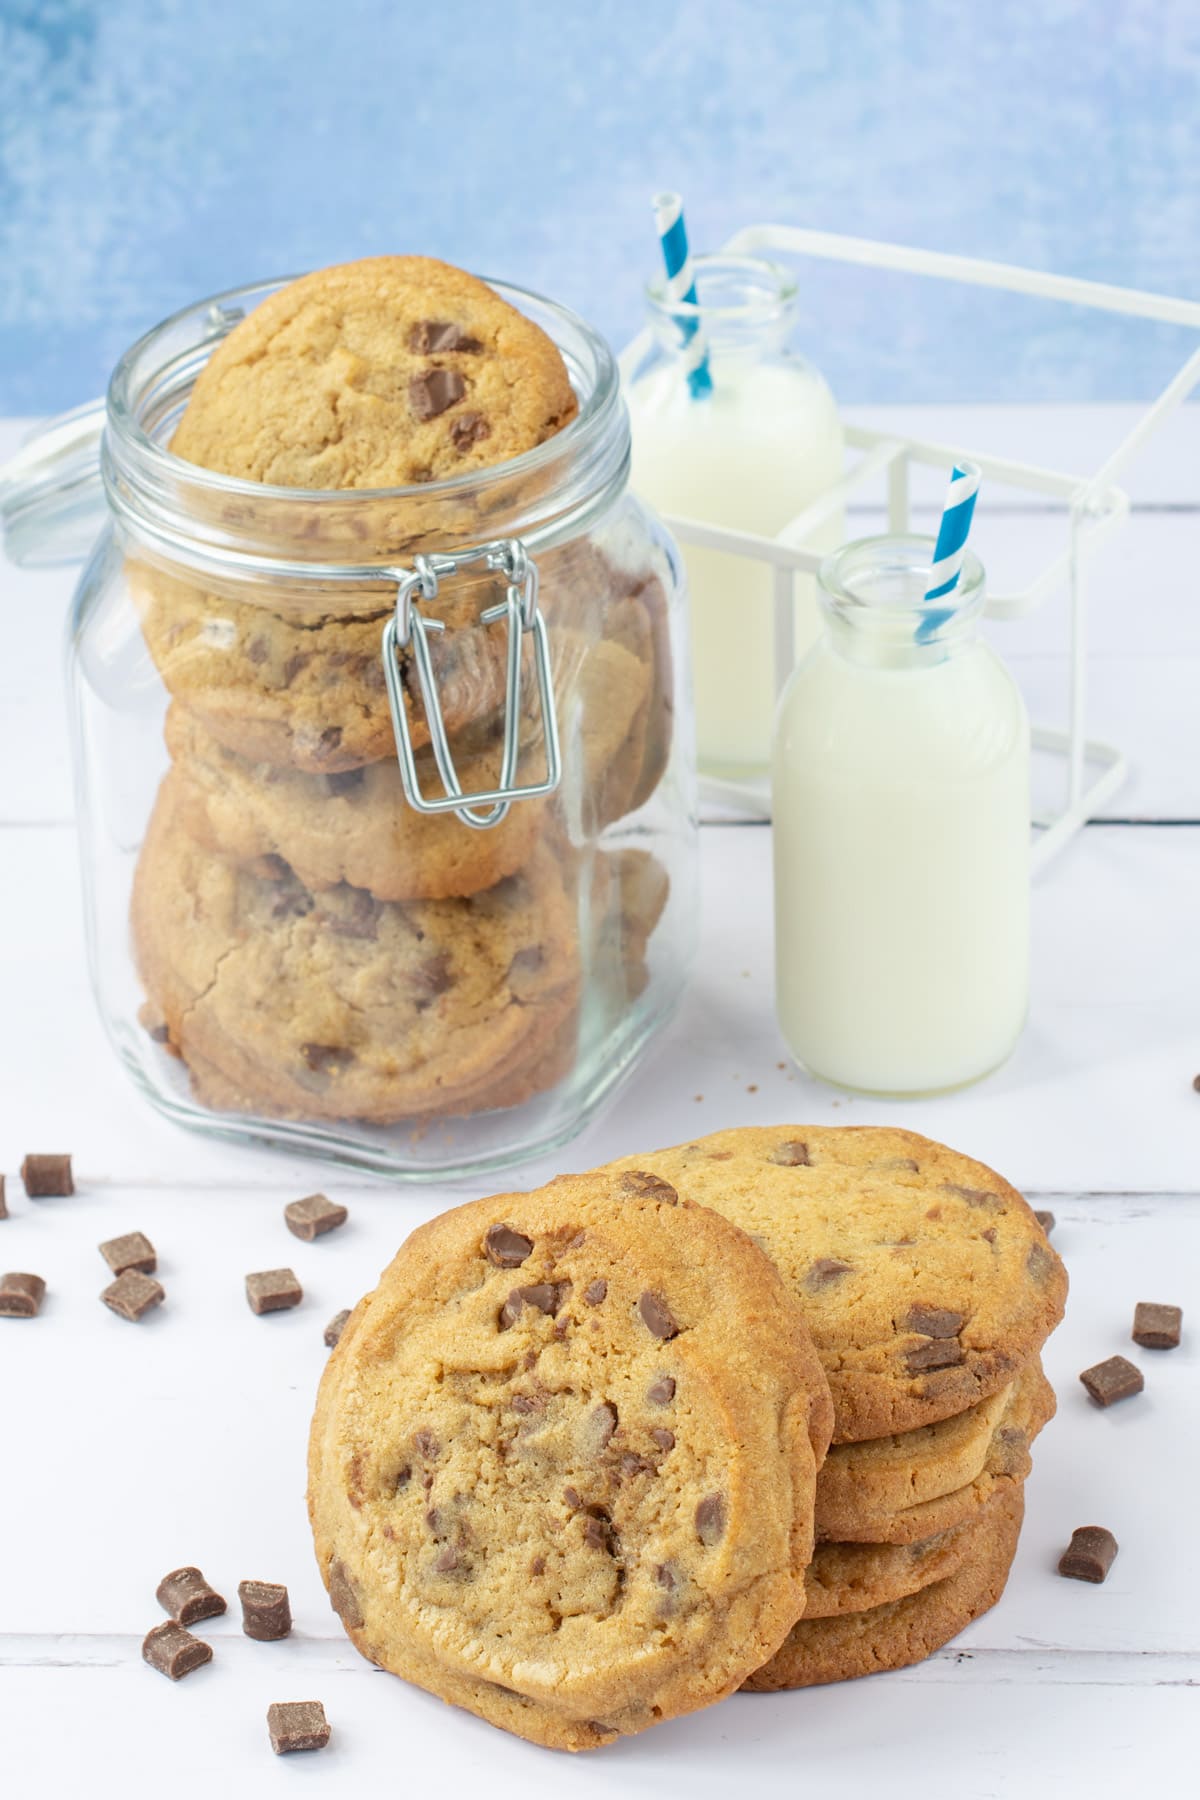 Delicious chunky chocolate chip cookies that the cookie monster would go crazy for. Soft in the middle, crunchy at the edges and packed full of milk chocolate chunks.